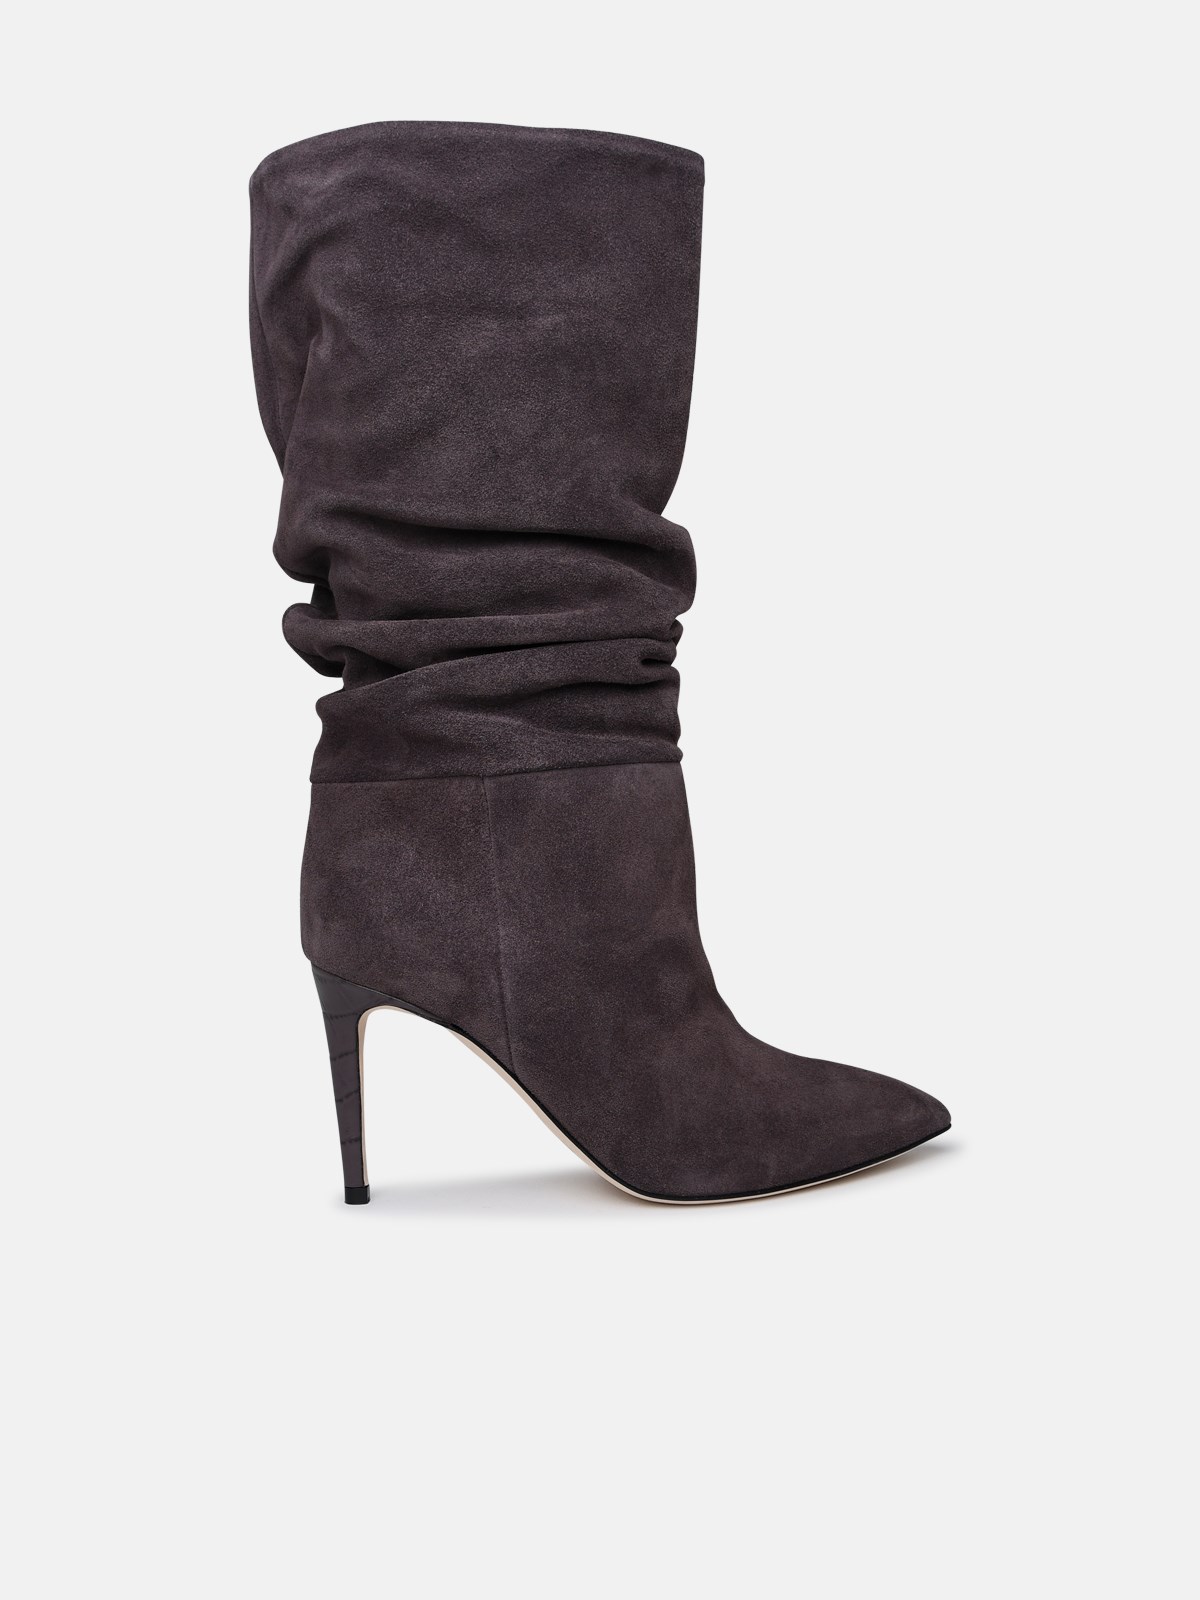 Paris Texas Slouchy 85 Grey Suede Boots